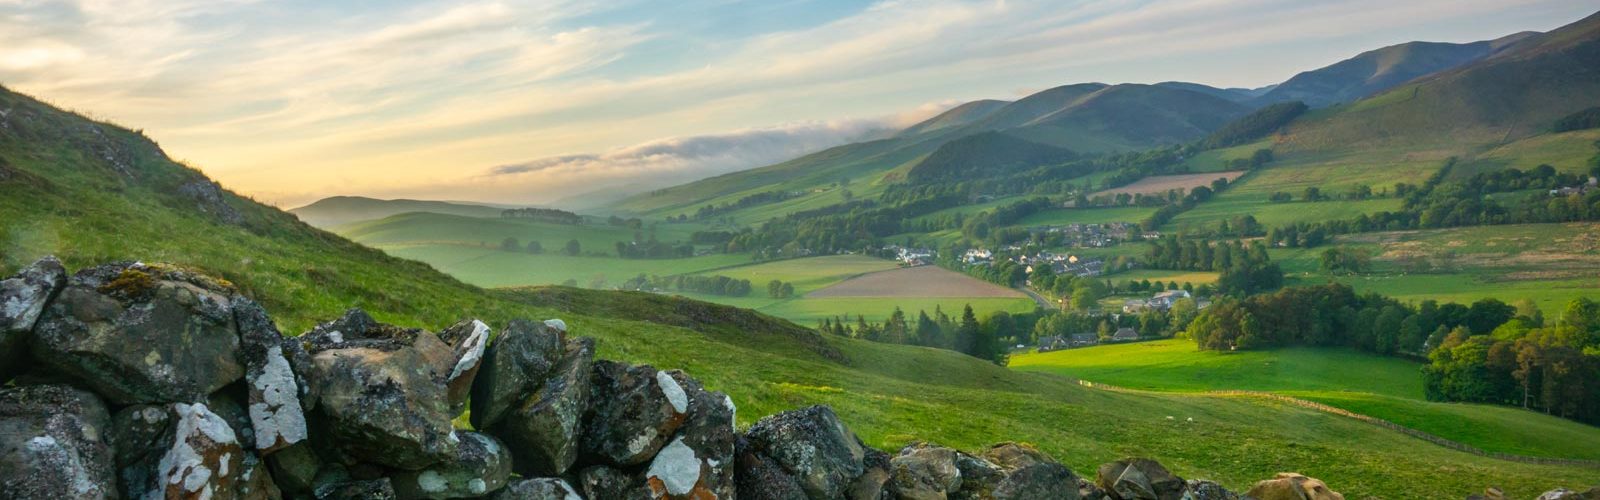 Rolling hills and beautiful scenery in the Scottish Borders